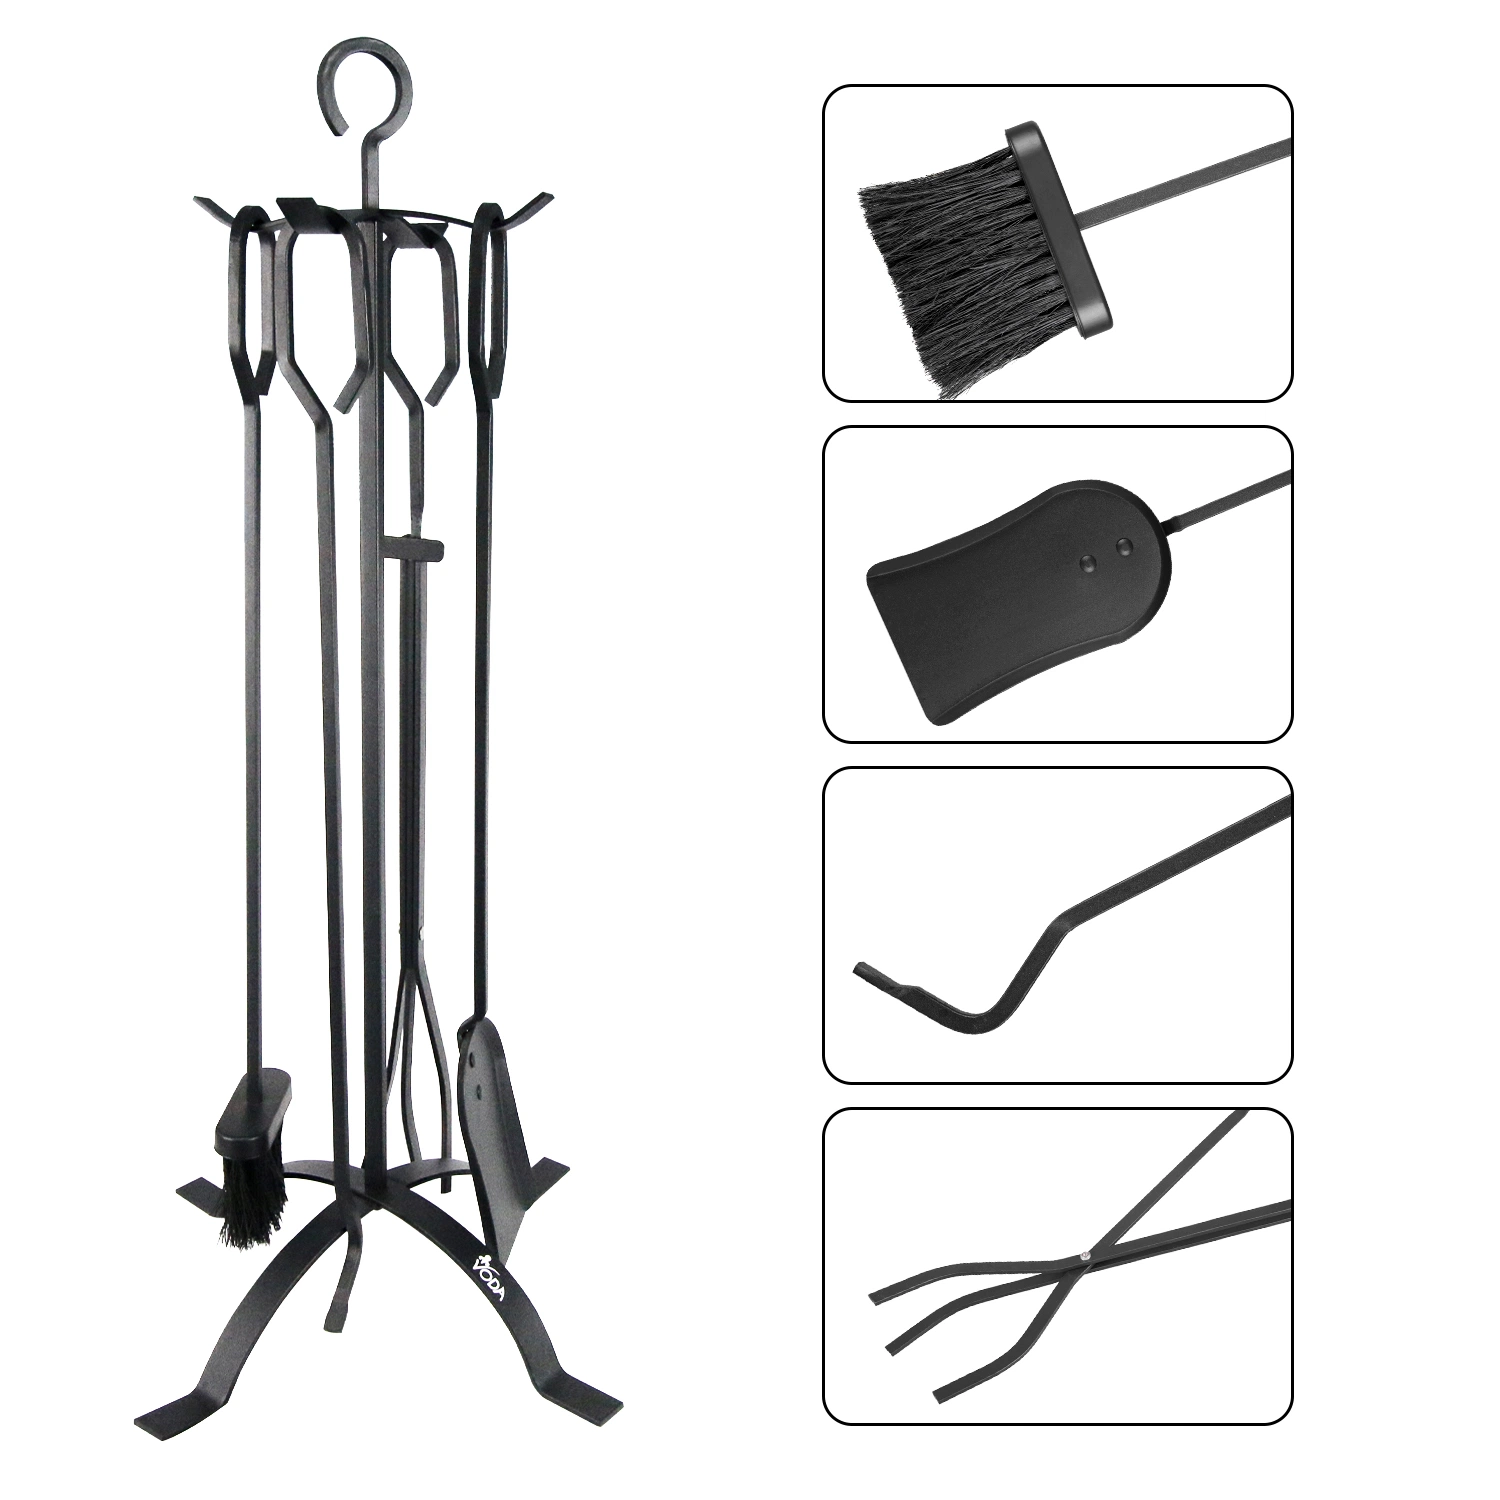 New Fire 5 Pieces Fireplace Tools Sets Fireplace Accessories Tools Holder with Handles Tools for Indoor Fireplace Decor Outdoor Fire Pit Modern Tool